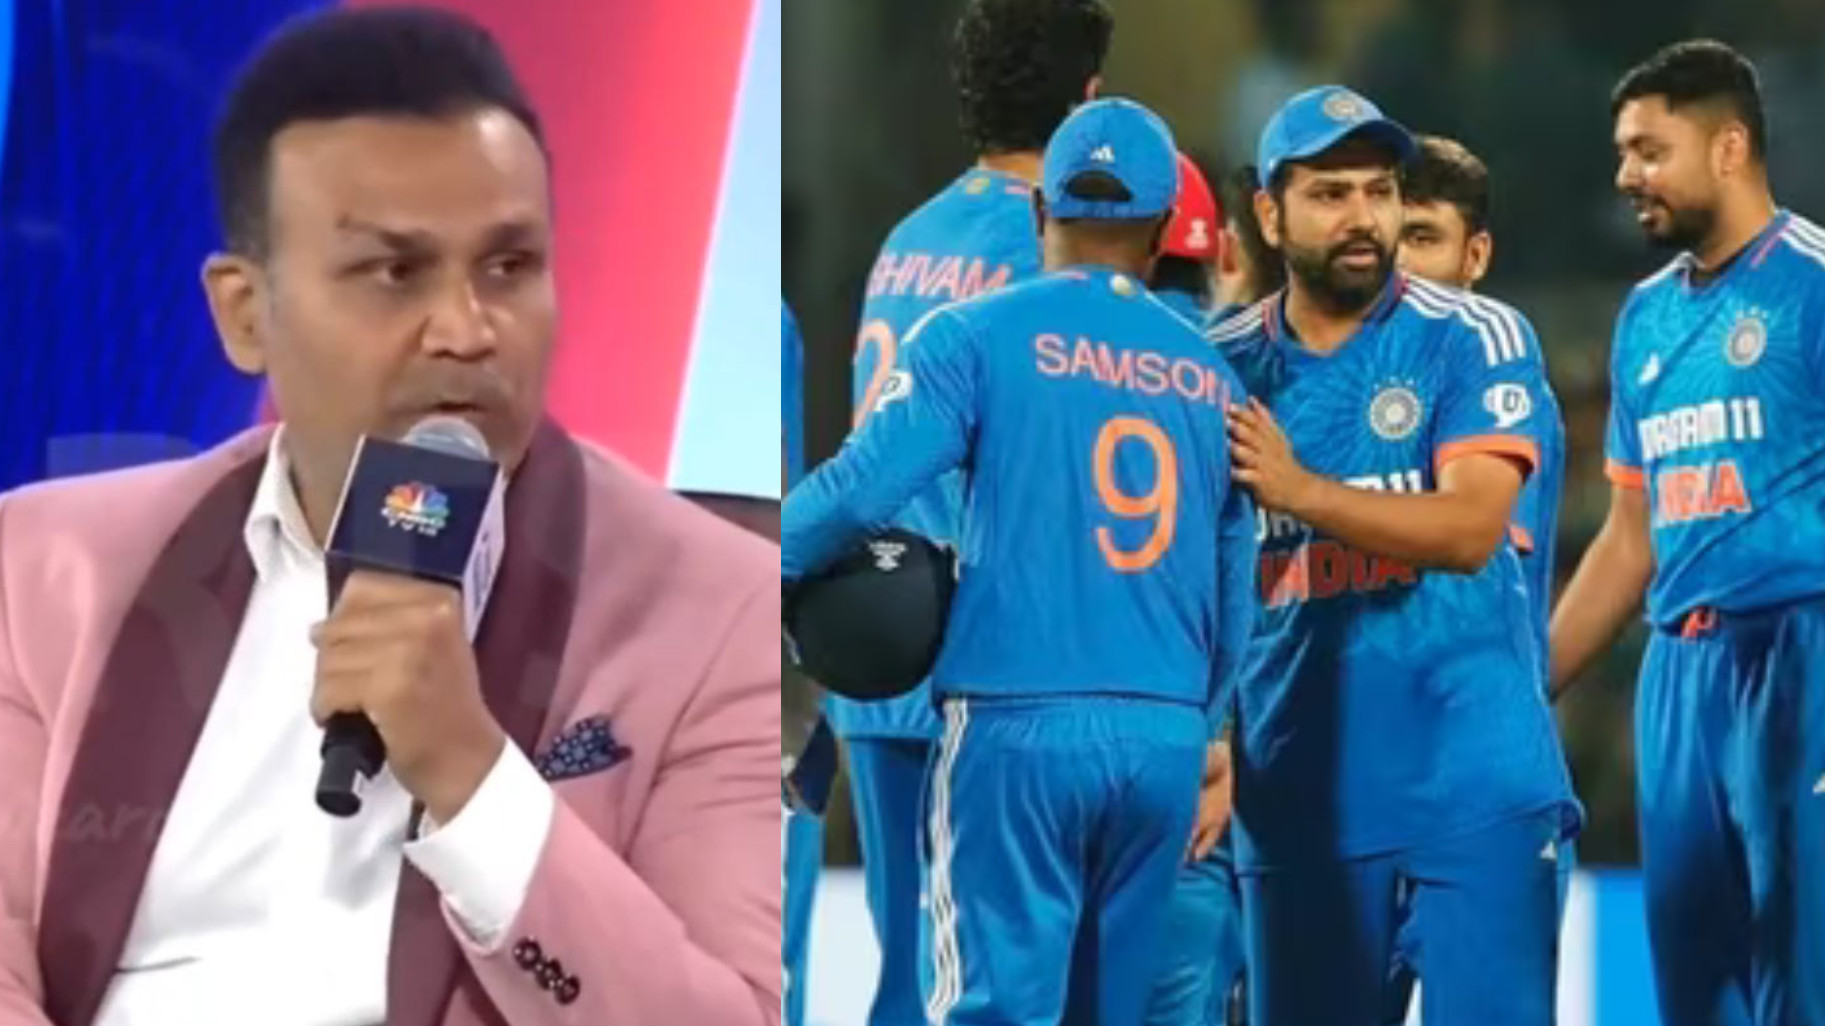 WATCH- Virender Sehwag says India needs to 'play fearlessly, with bravery' to win ICC trophy 